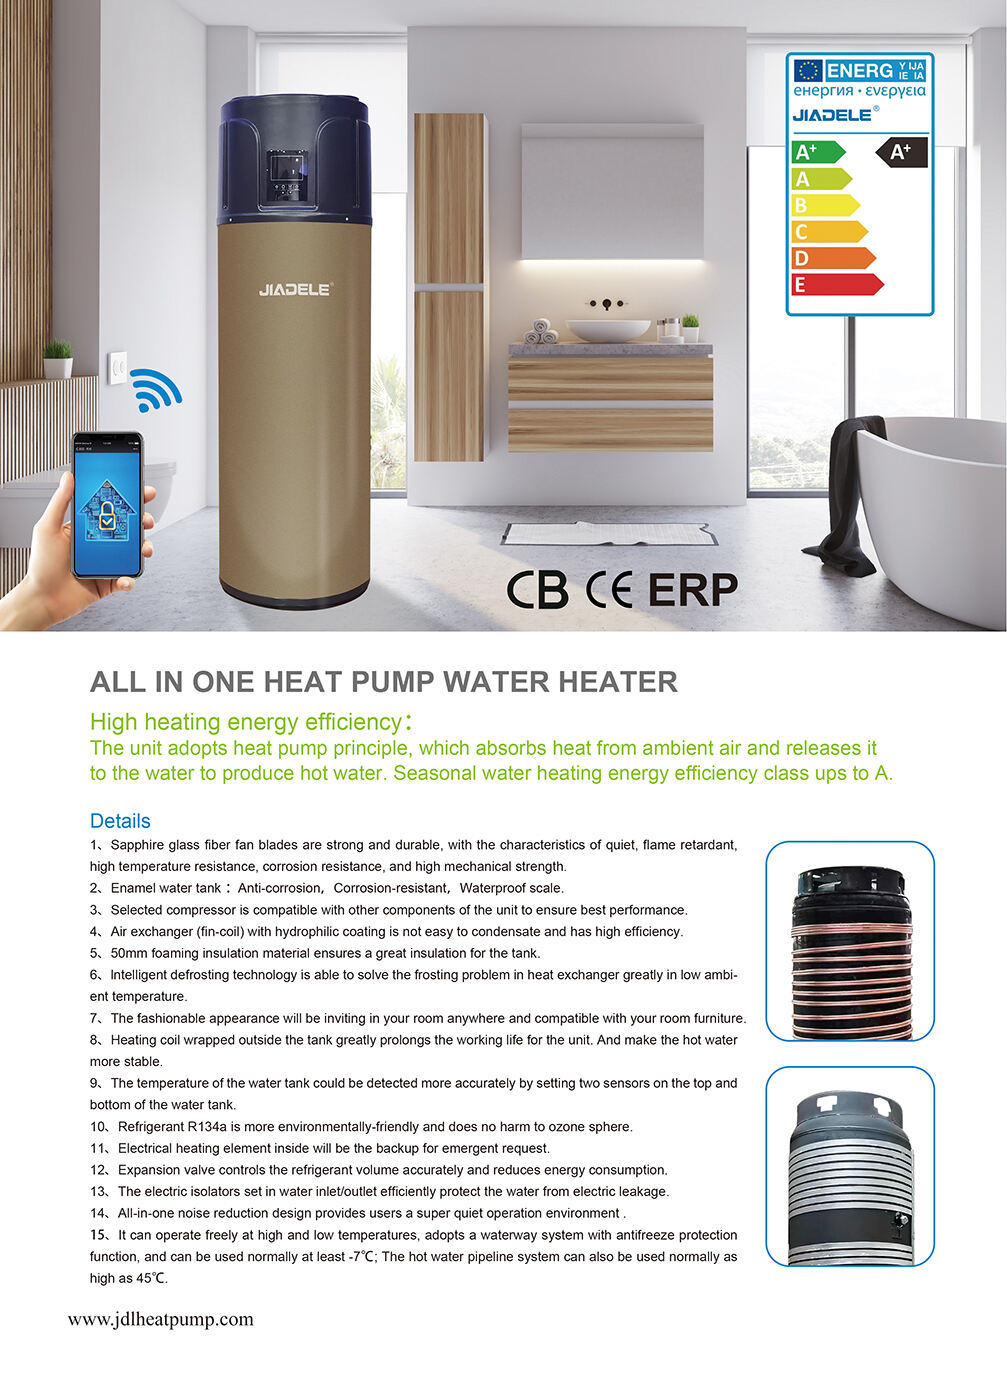 Boiler Air to Water Heaters Domestic Pump manufacture